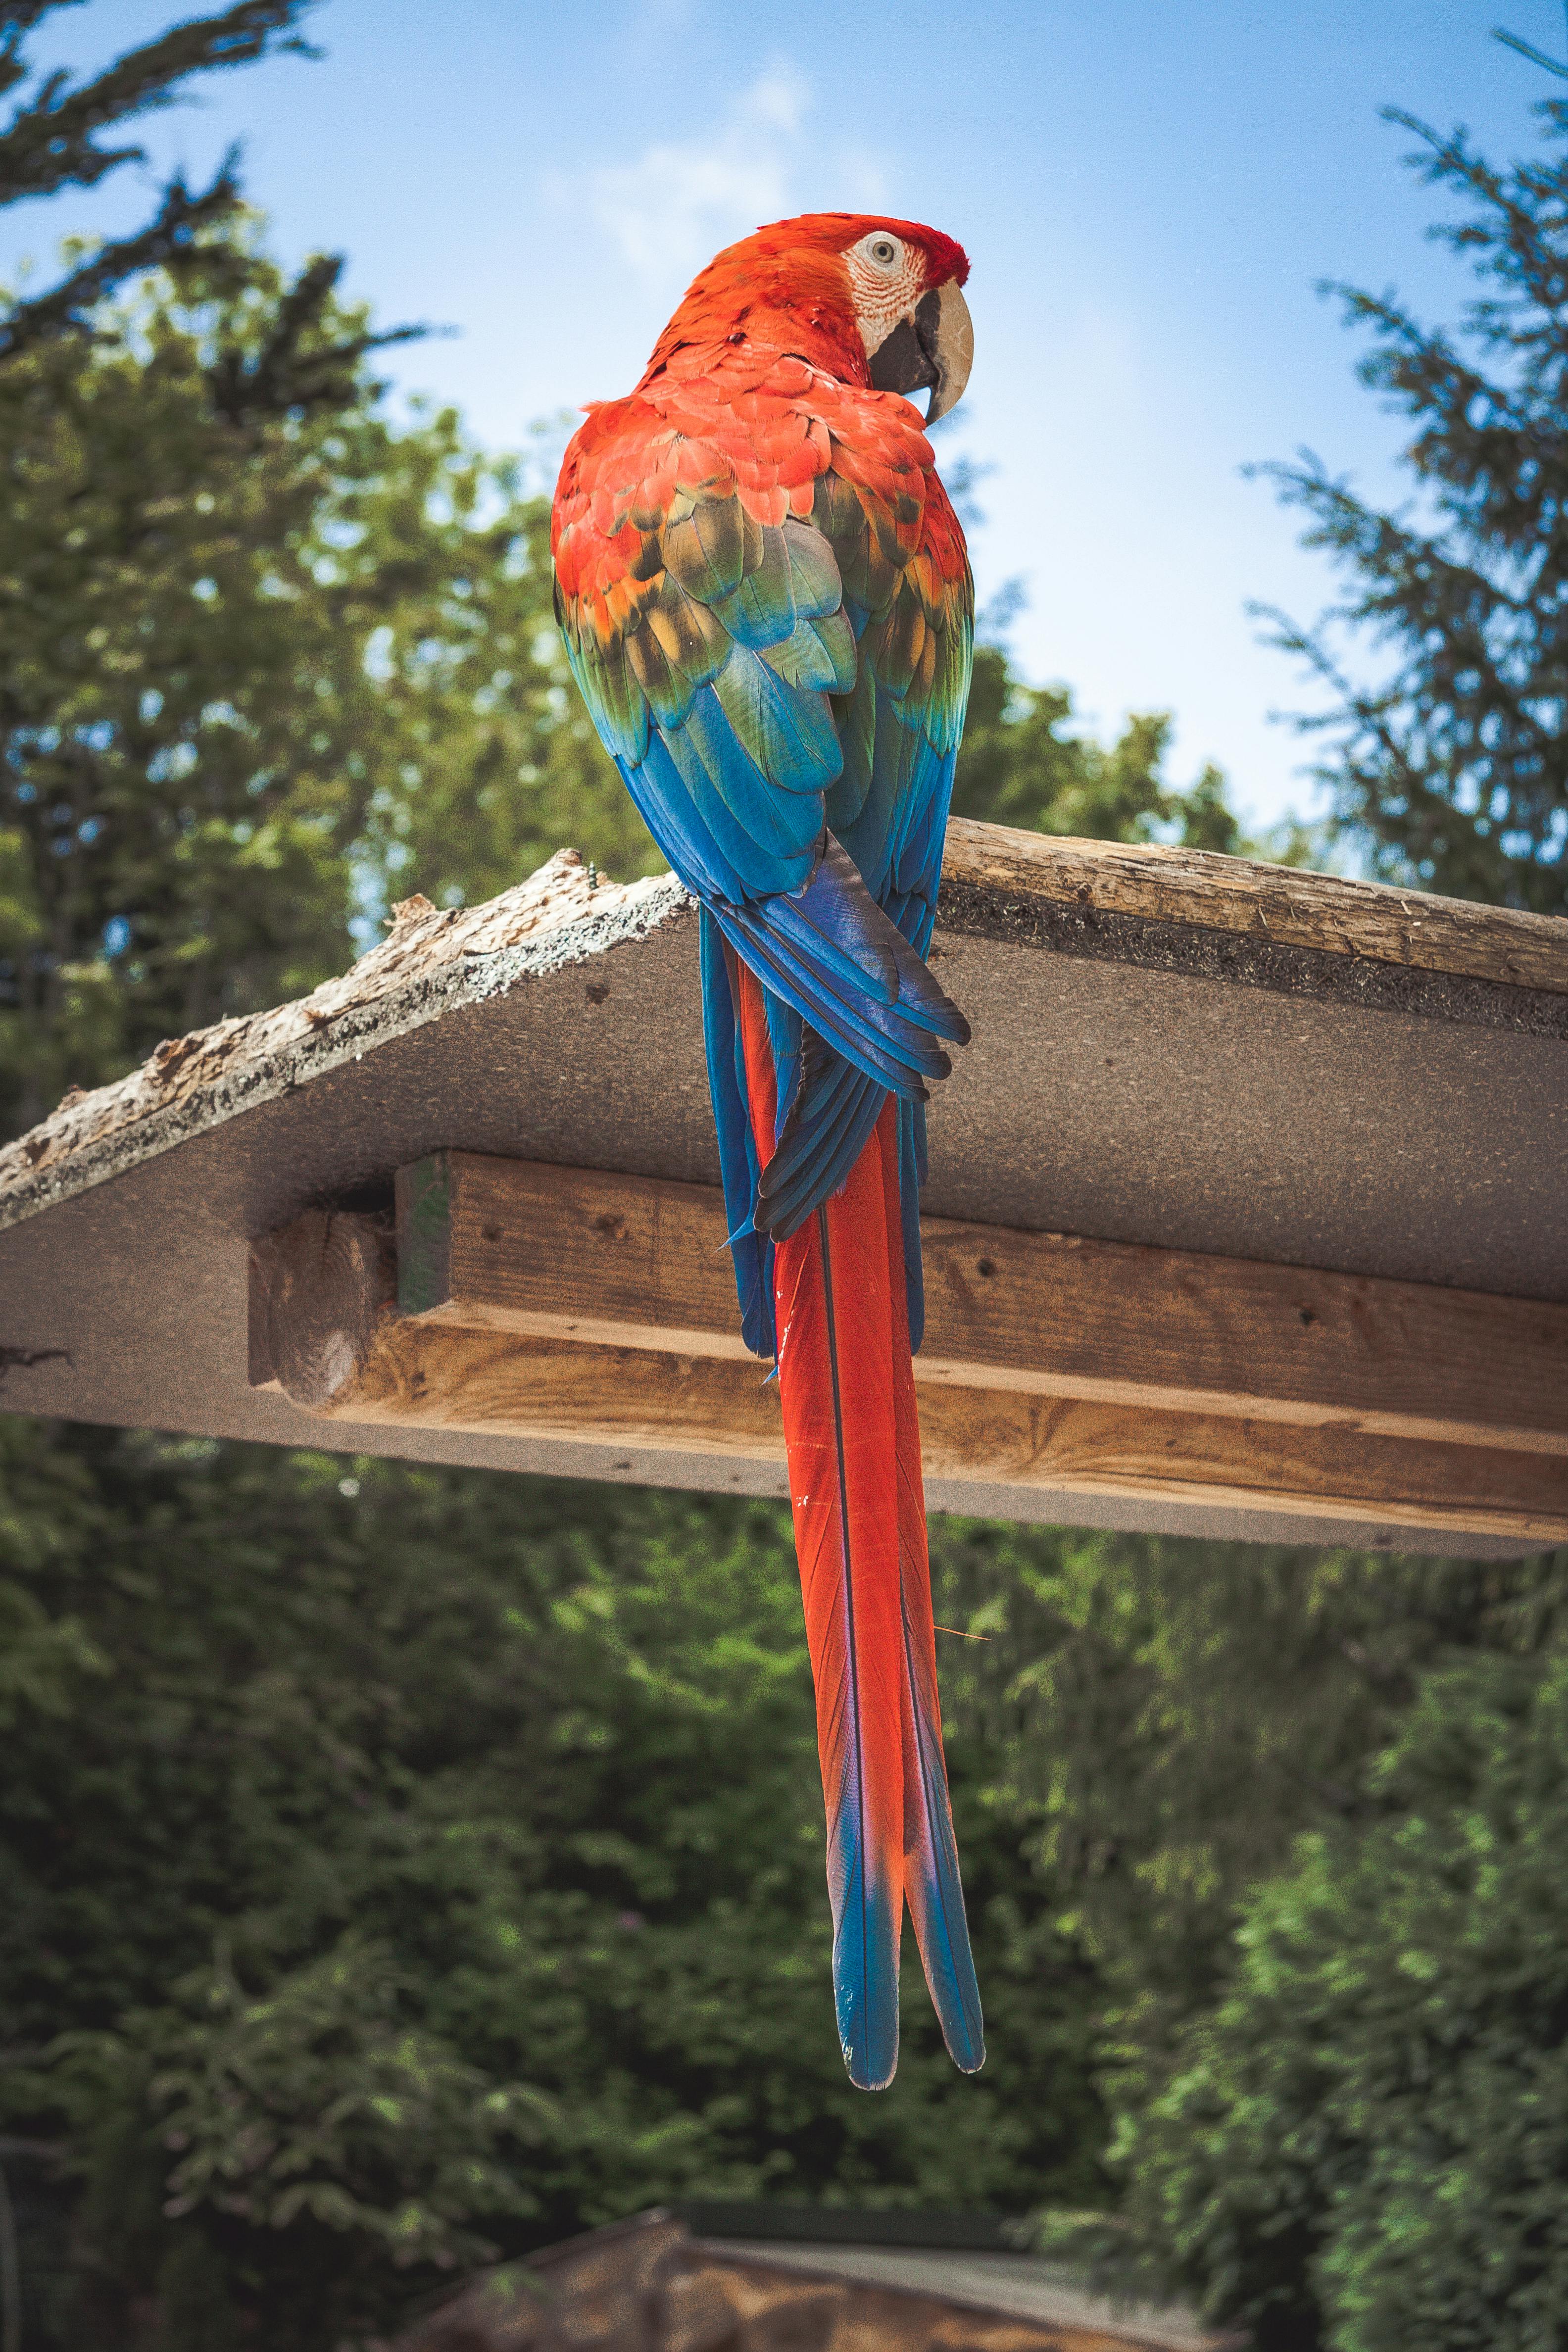 Macaw Photos, Download The BEST Free Macaw Stock Photos & HD Images